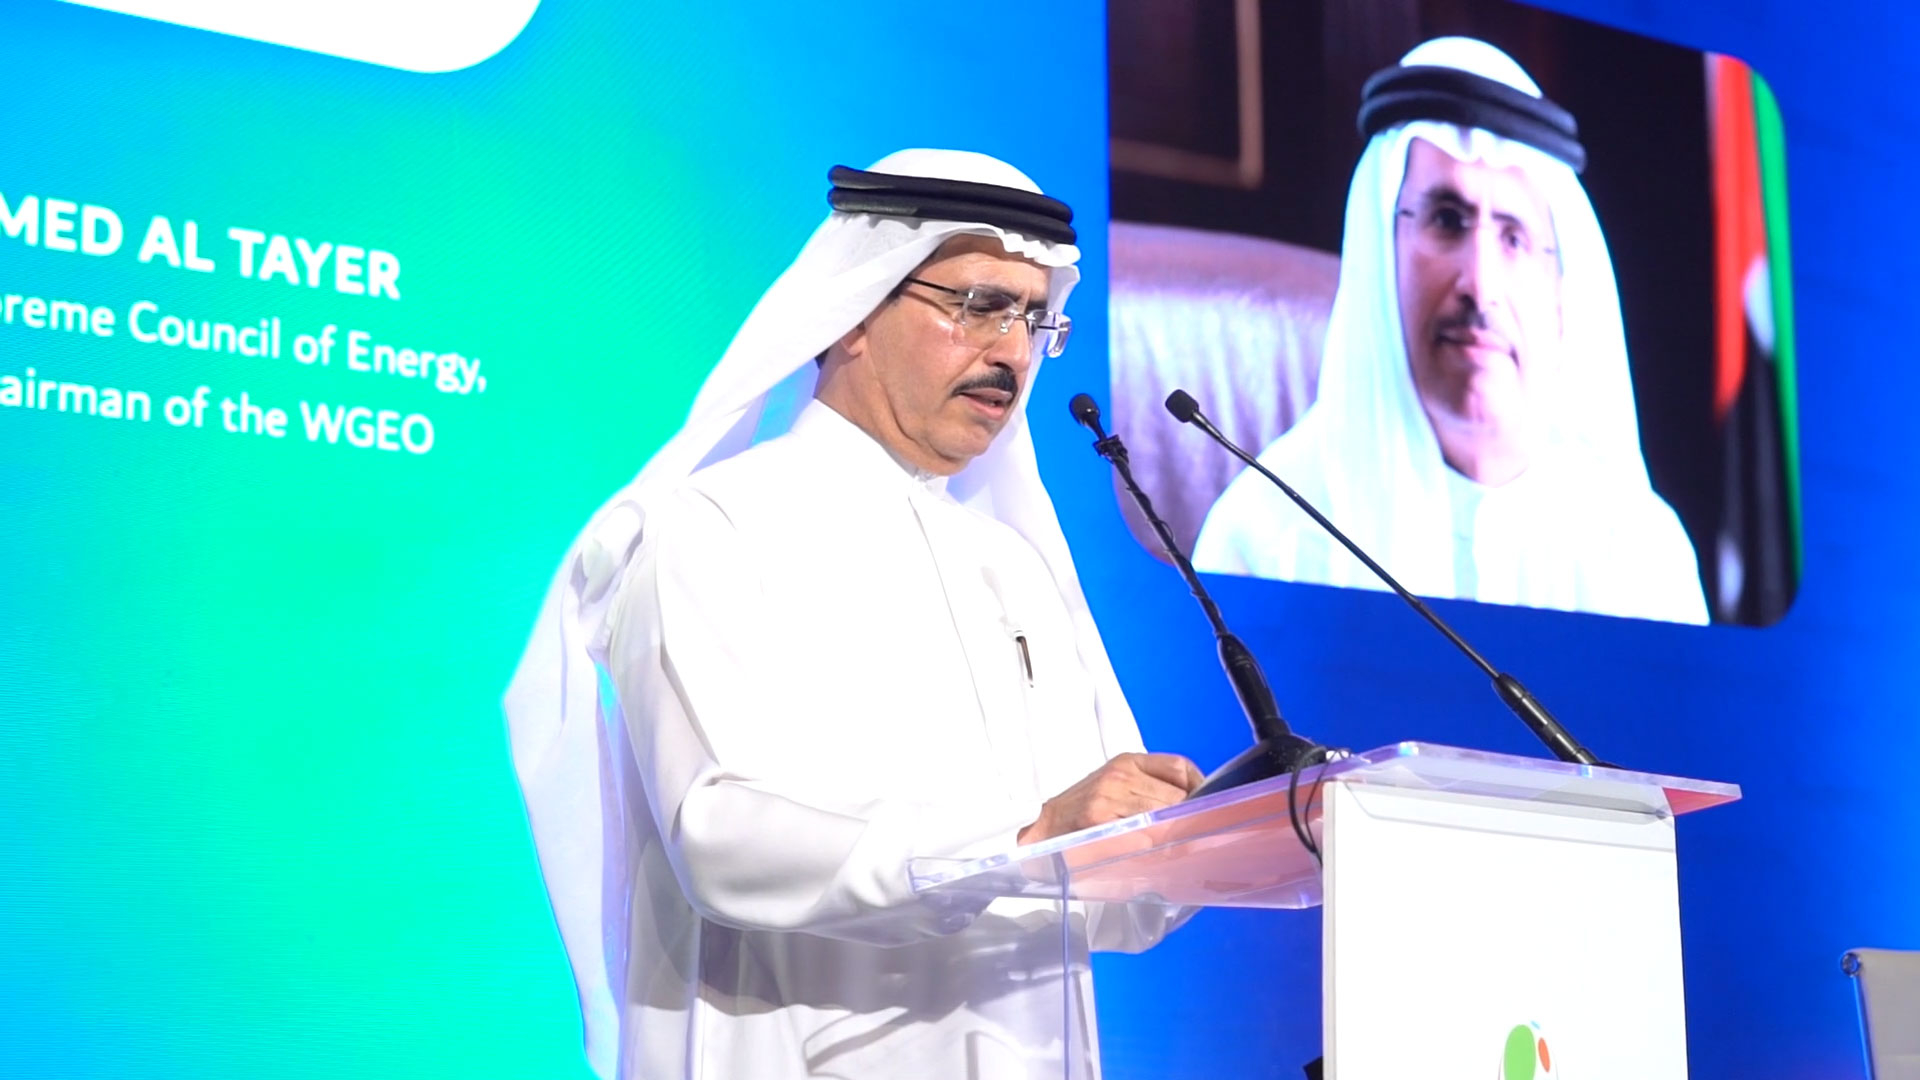 DEWA and WGEO complete preparations for 8th edition of the World Green Economy Summit (Video: AETOSWire)